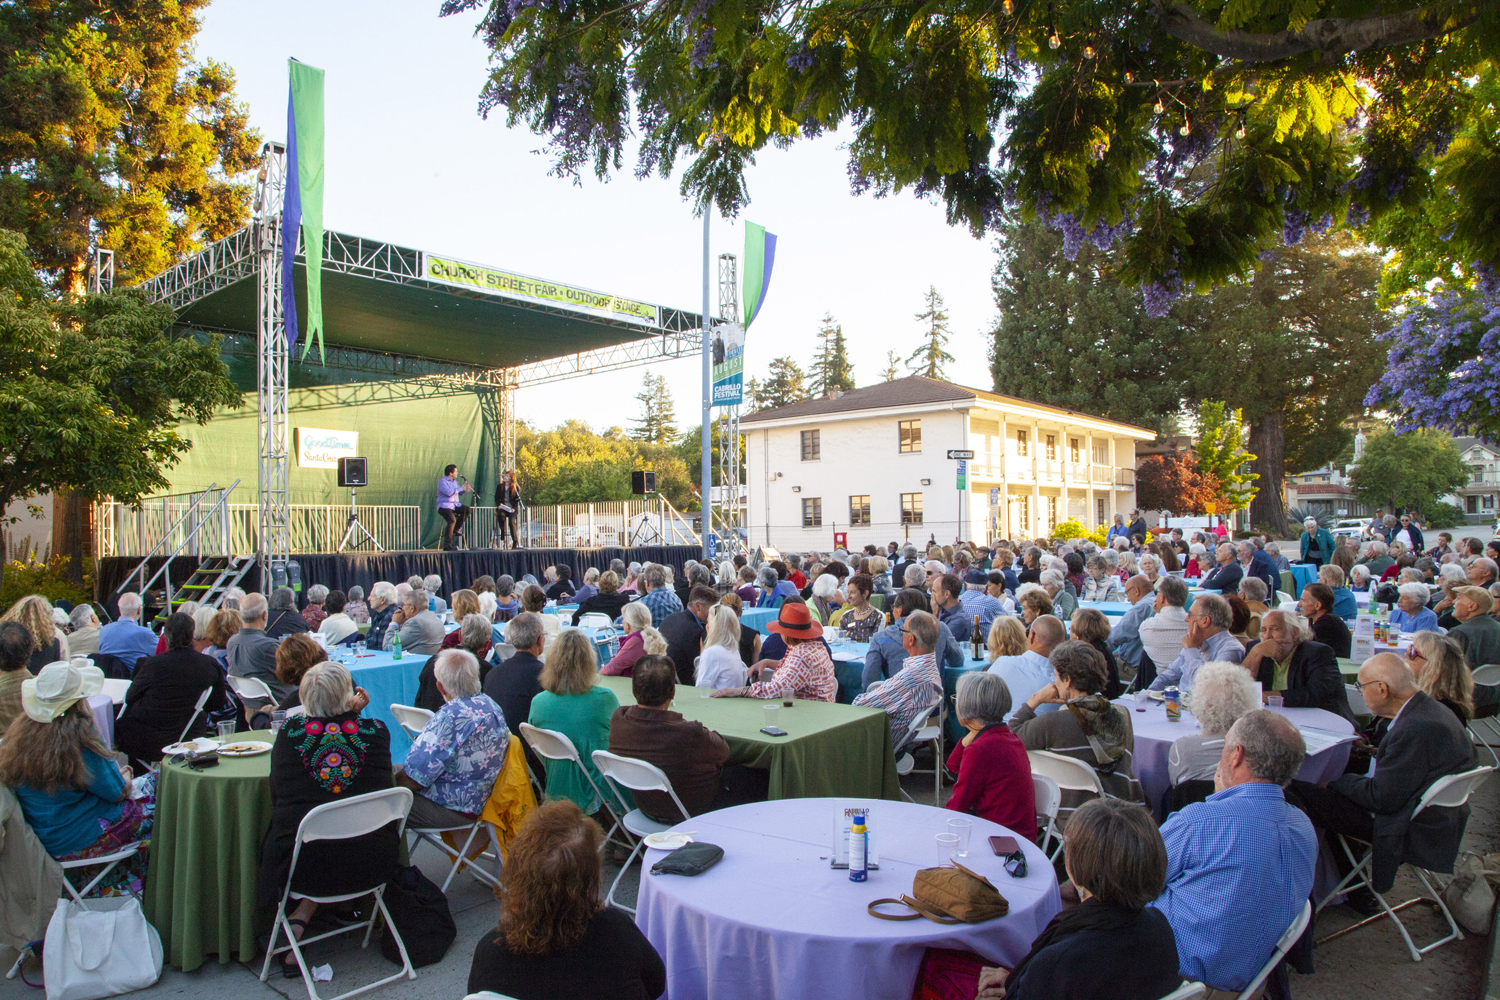 The Opening Night crowd gathers outside the Santa Cruz Civic Auditorium for dinner and a talk by Cristi Macelaru.